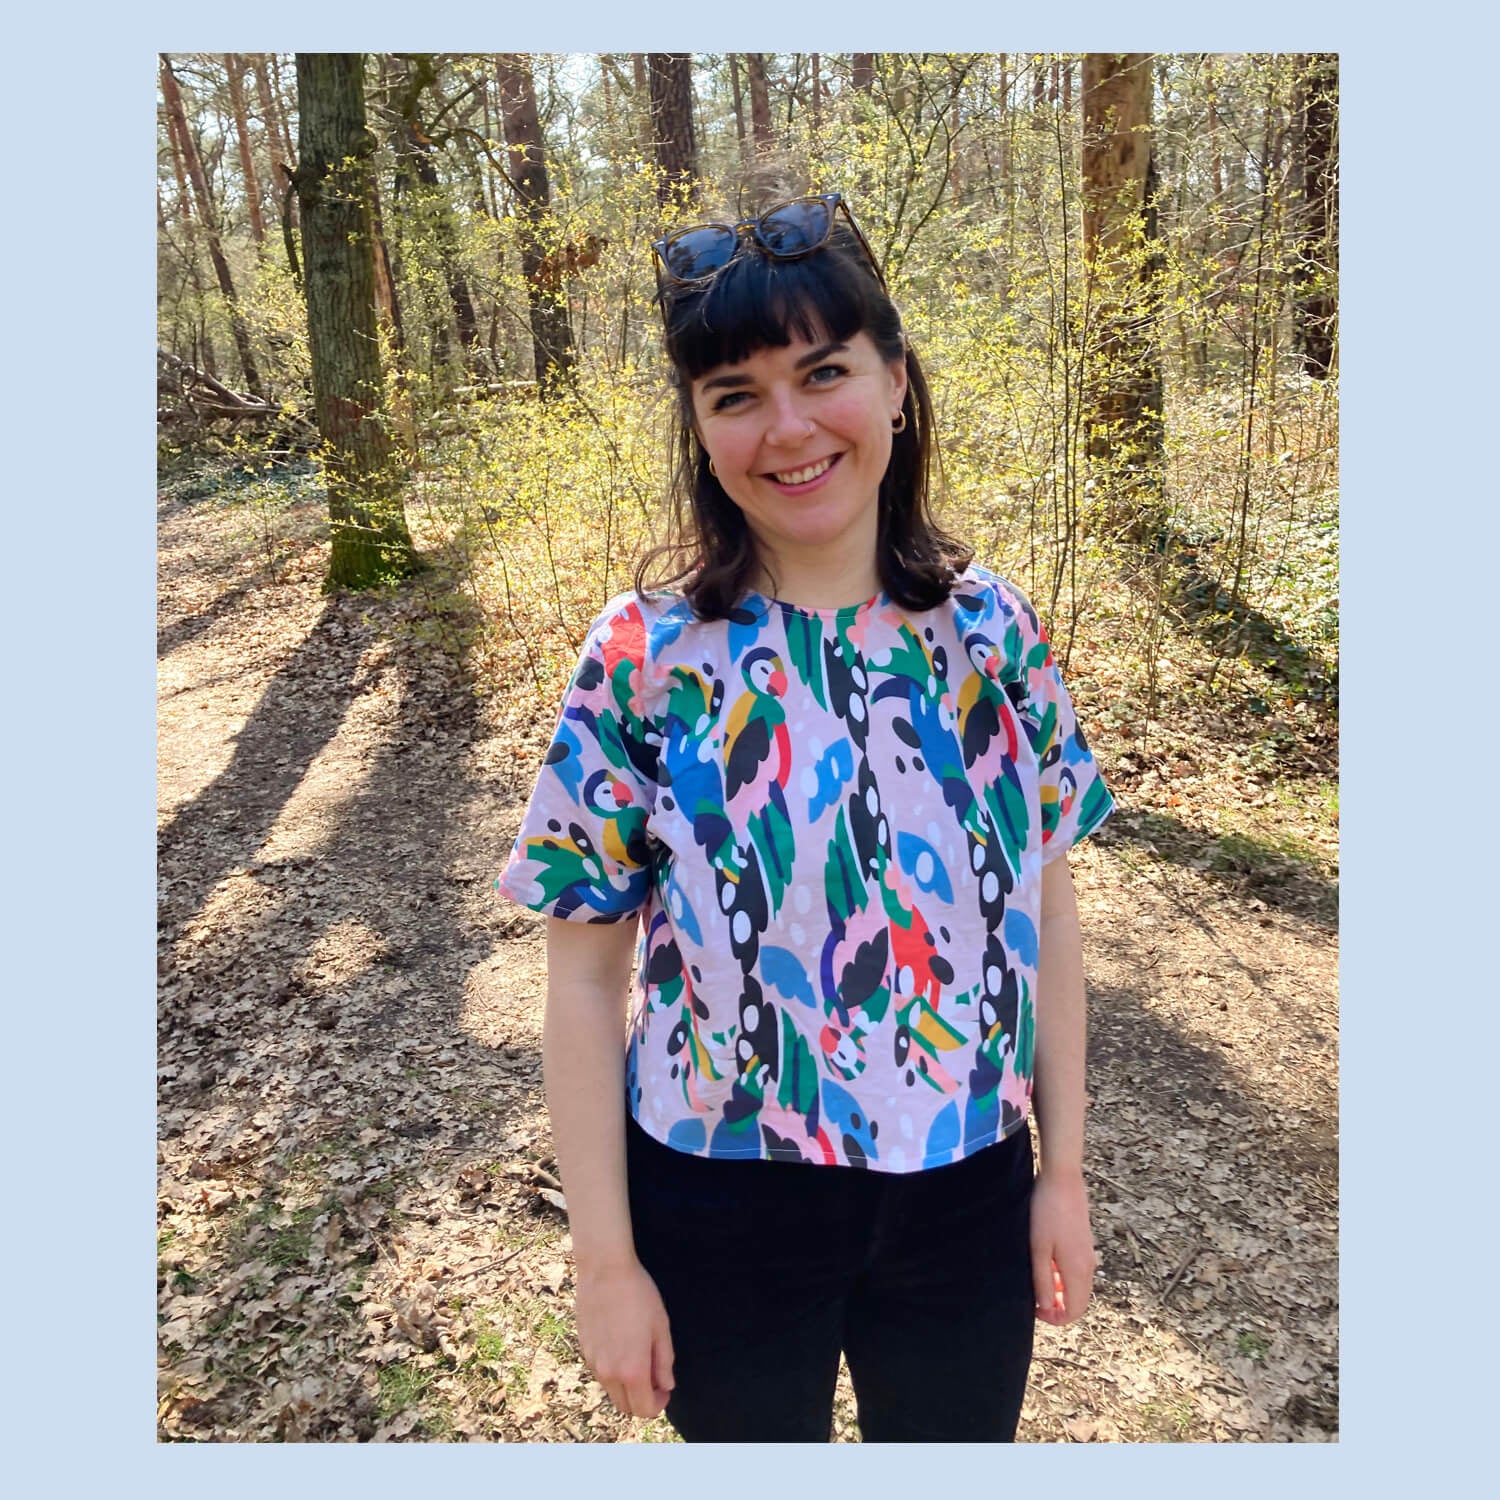 Alice wearing a handmade top in 'Find the Parrots' design